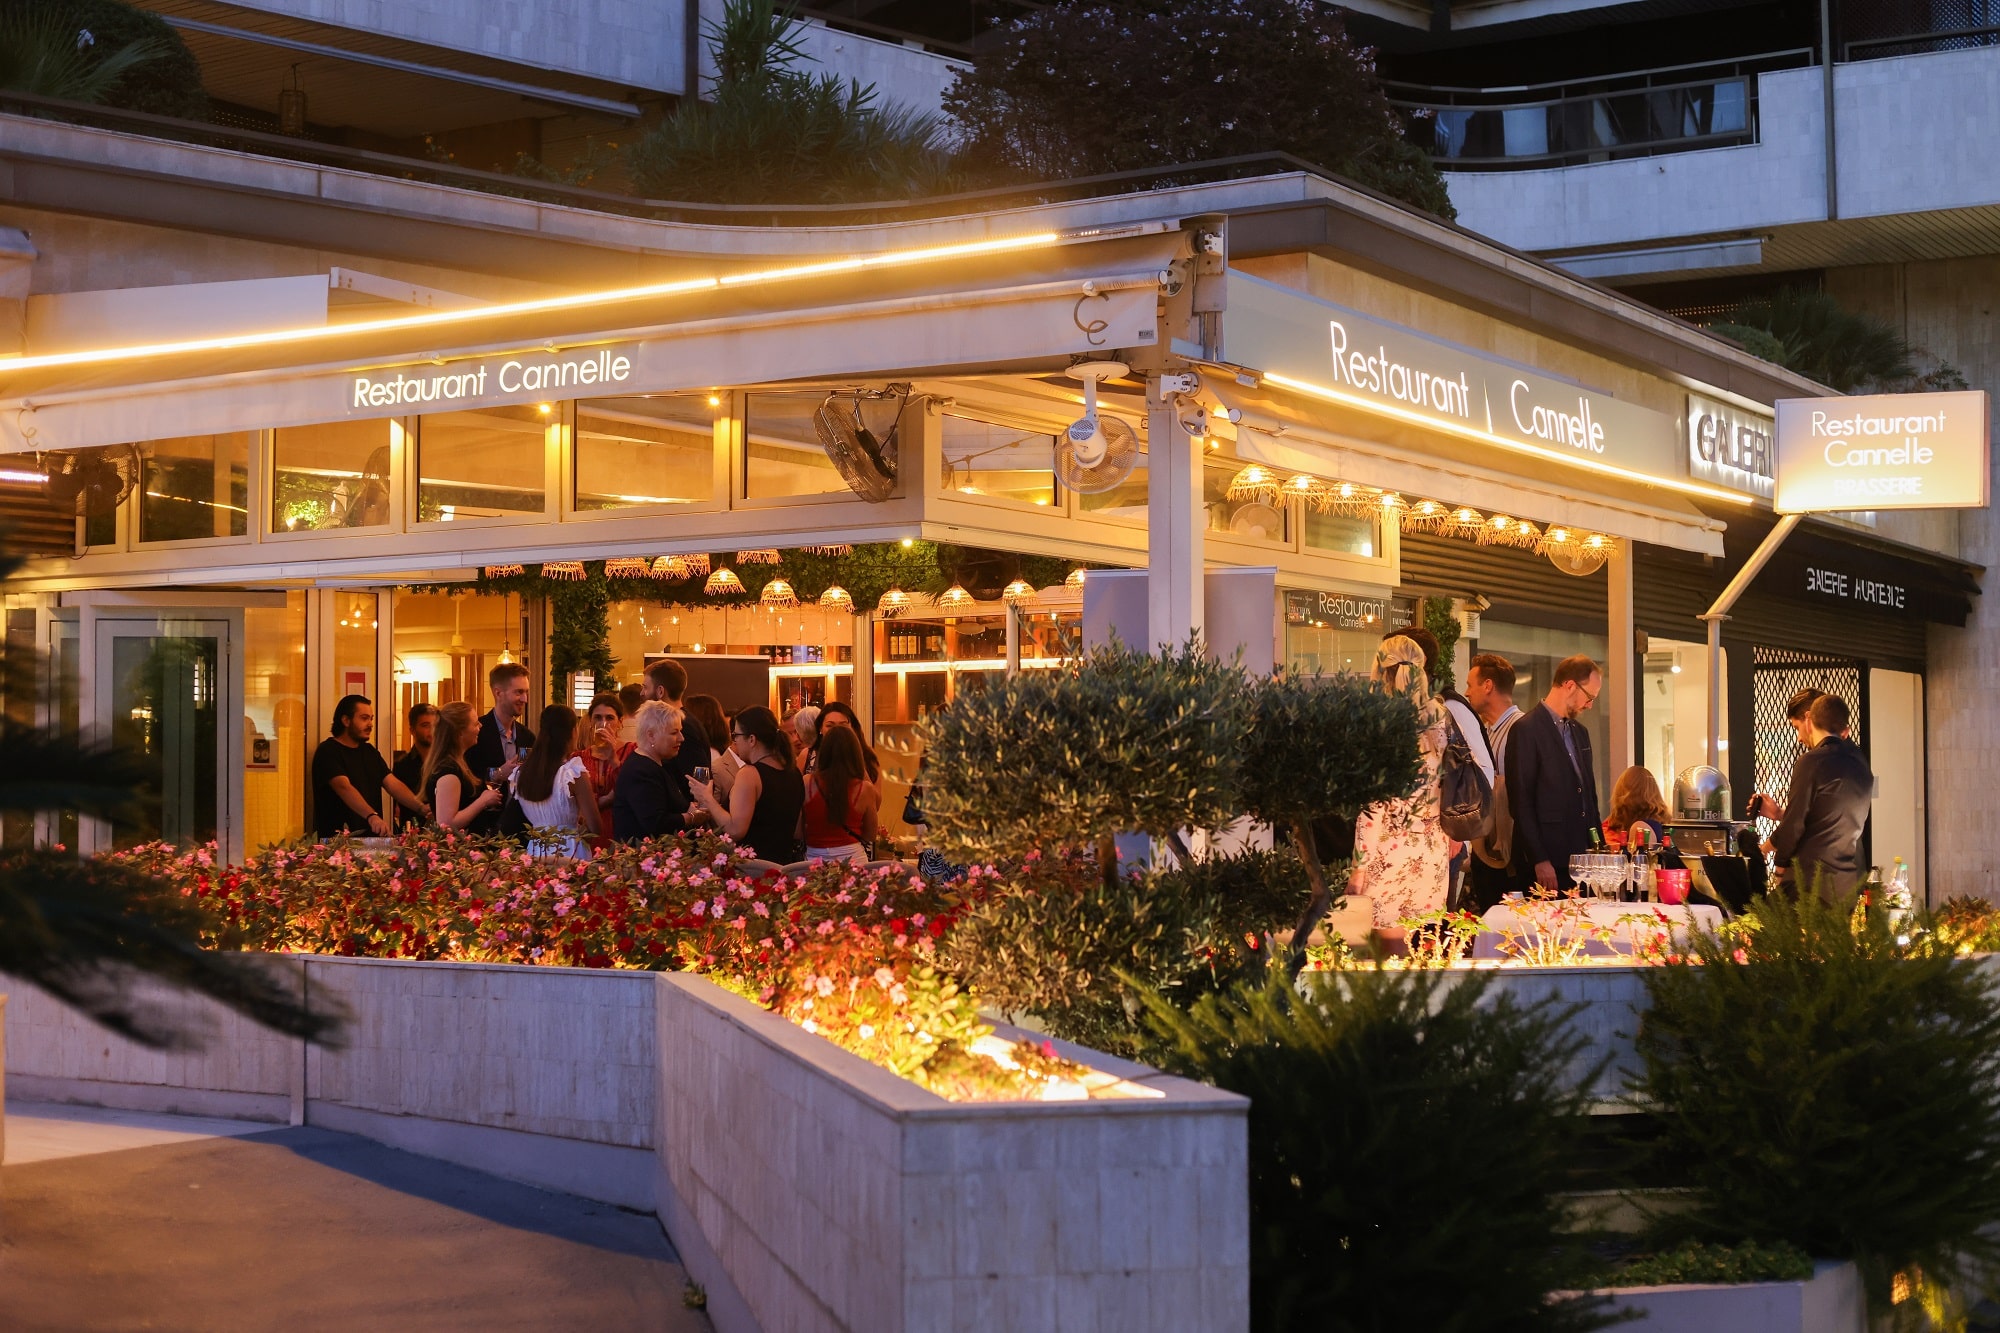 restaurant cannes-cuisine francaise cannes-location de salle cannes-meilleur restaurant cannes-cuisine mediterraneenne cannes